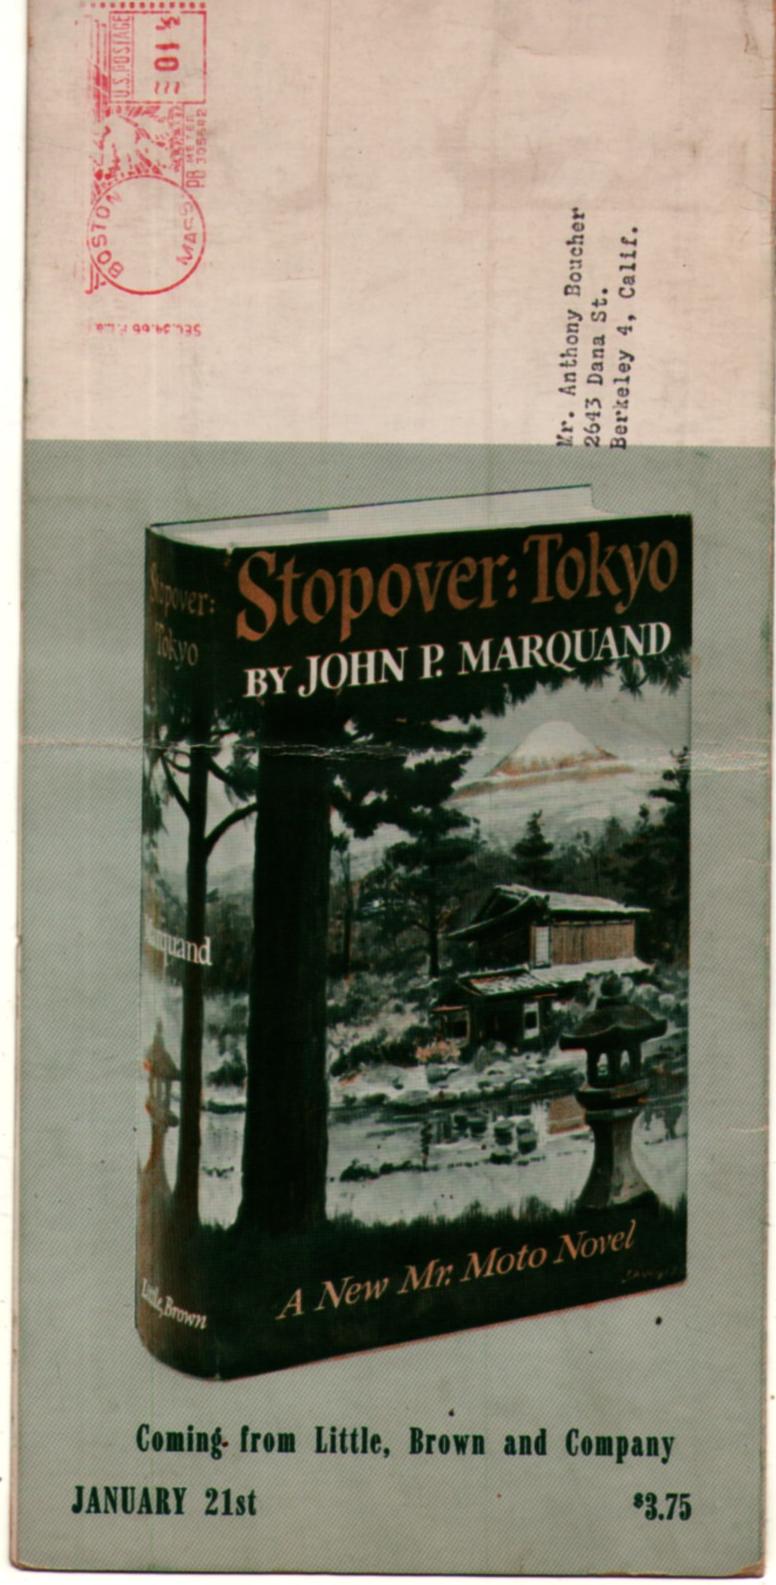 Image for John Marquand's Stopover Tokyo Press Release